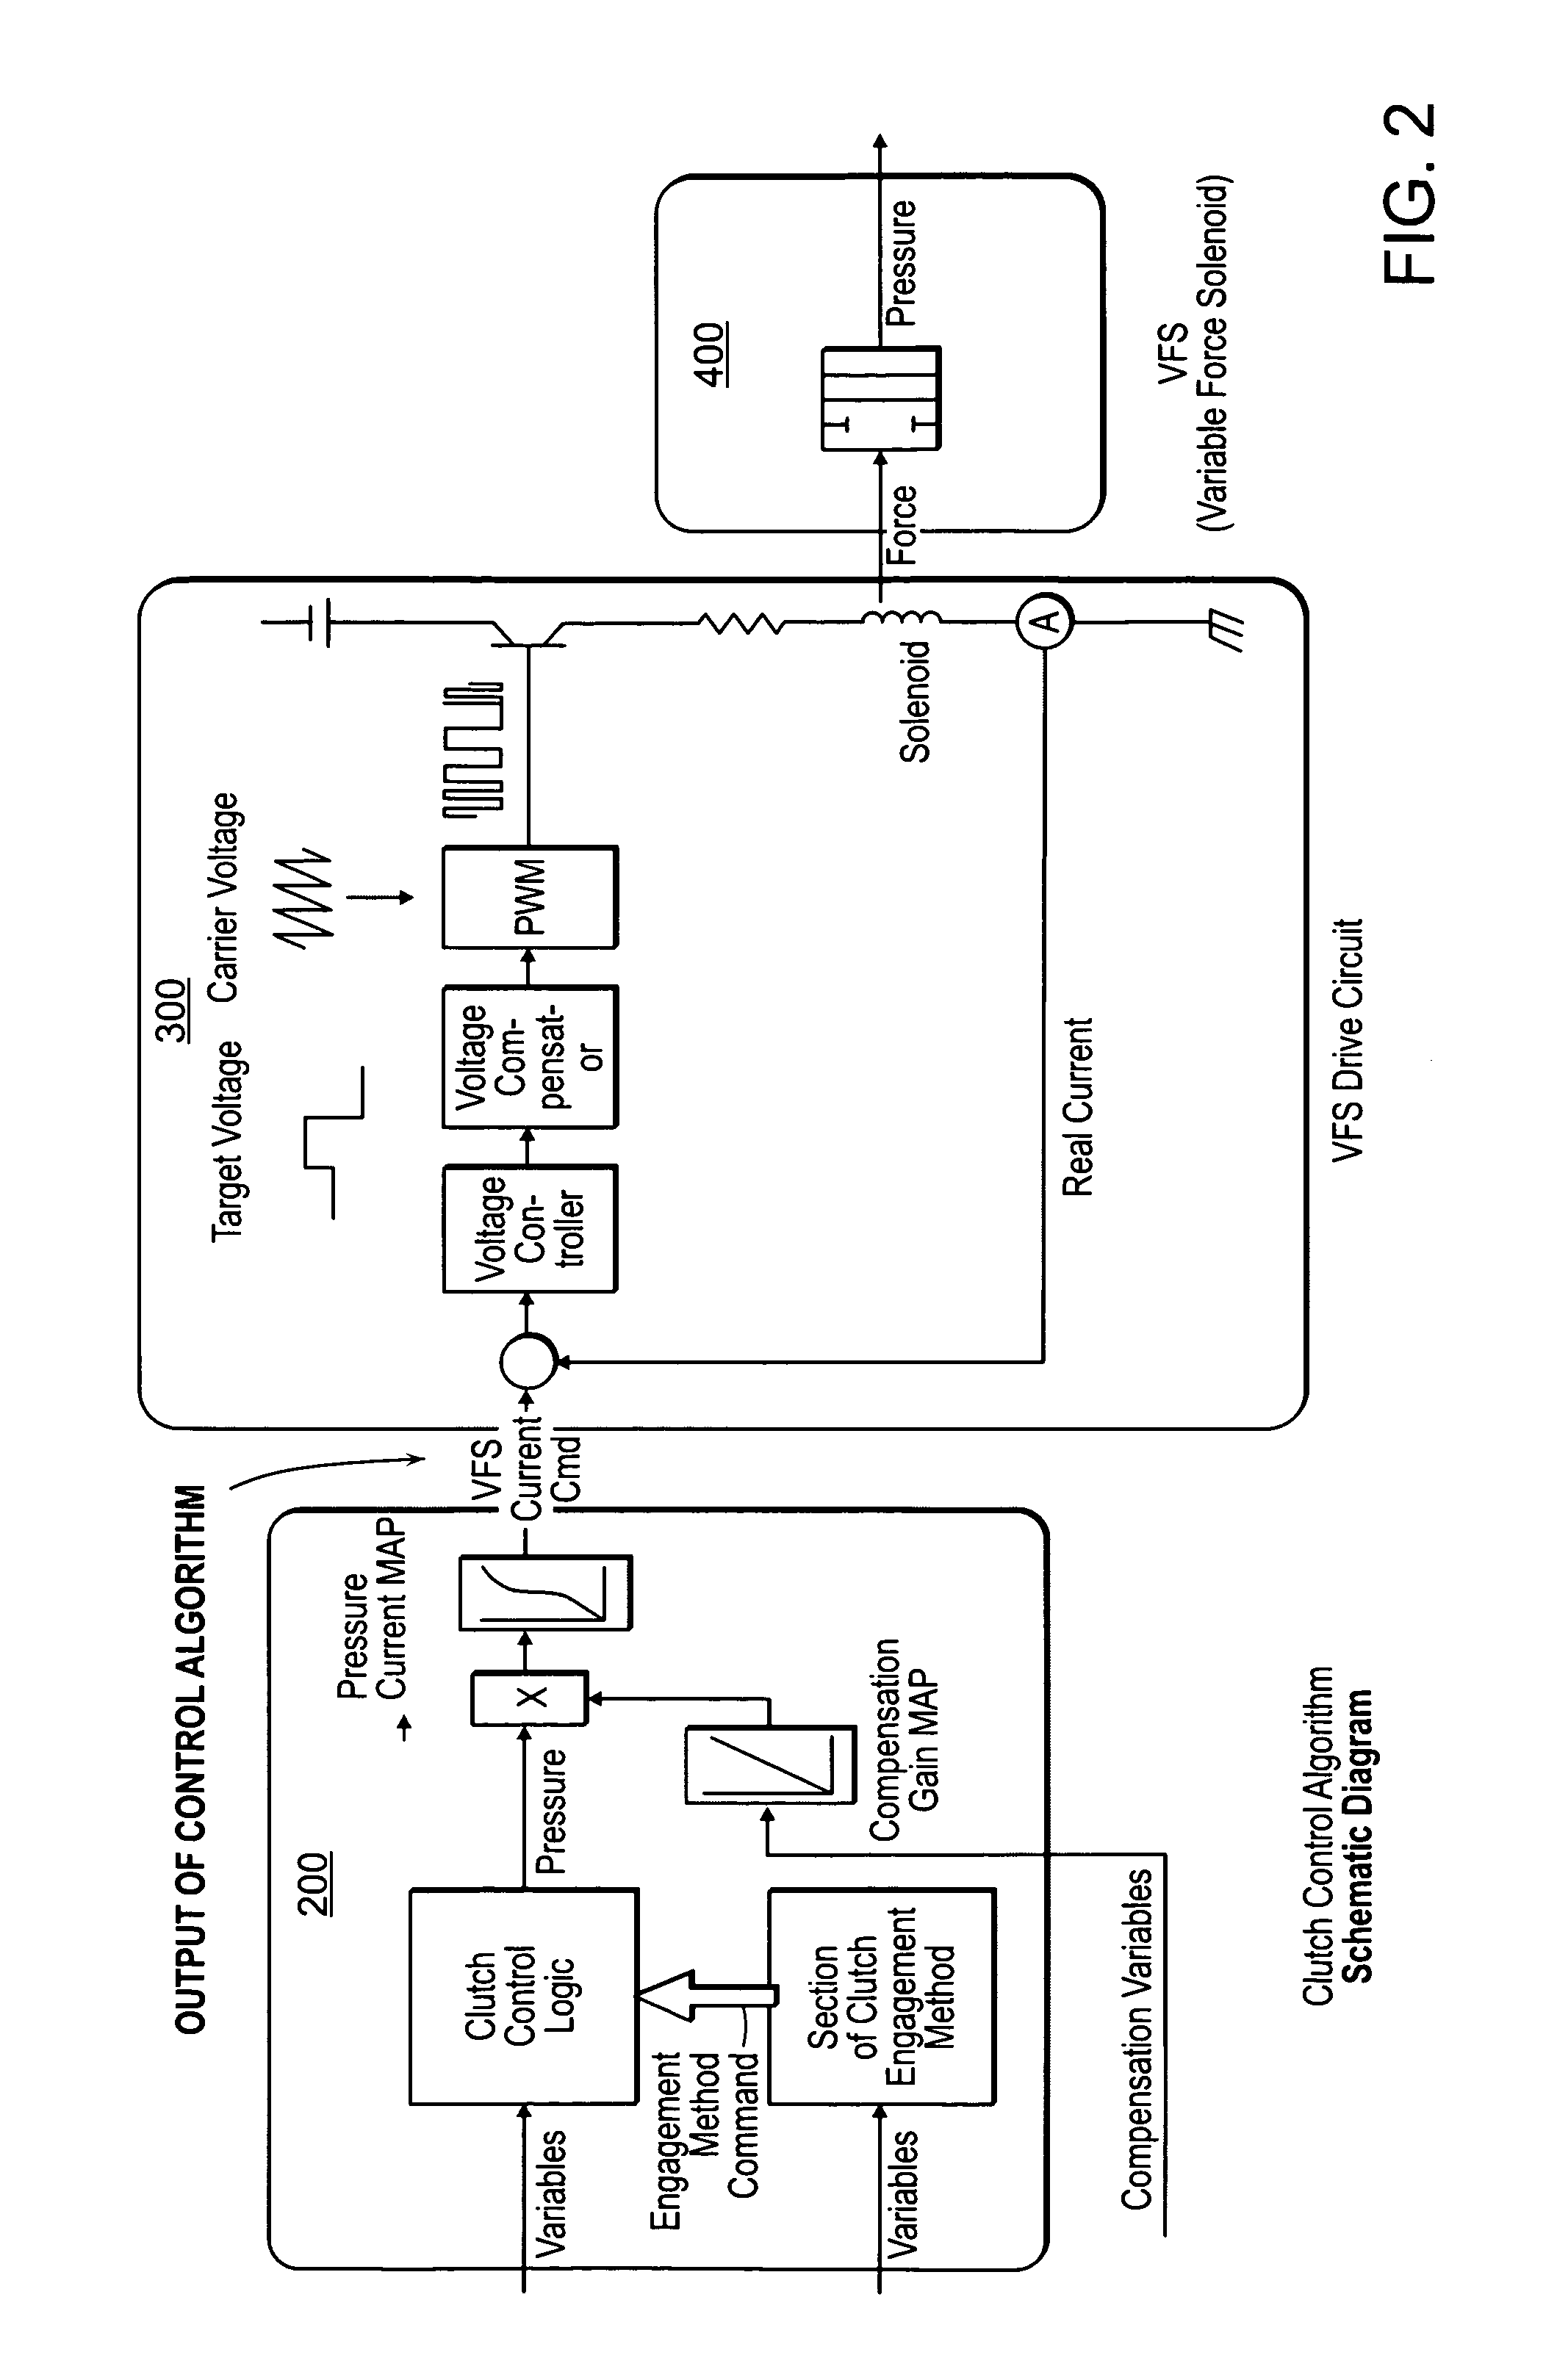 System and method for controlling clutch engagement in hybrid vehicle